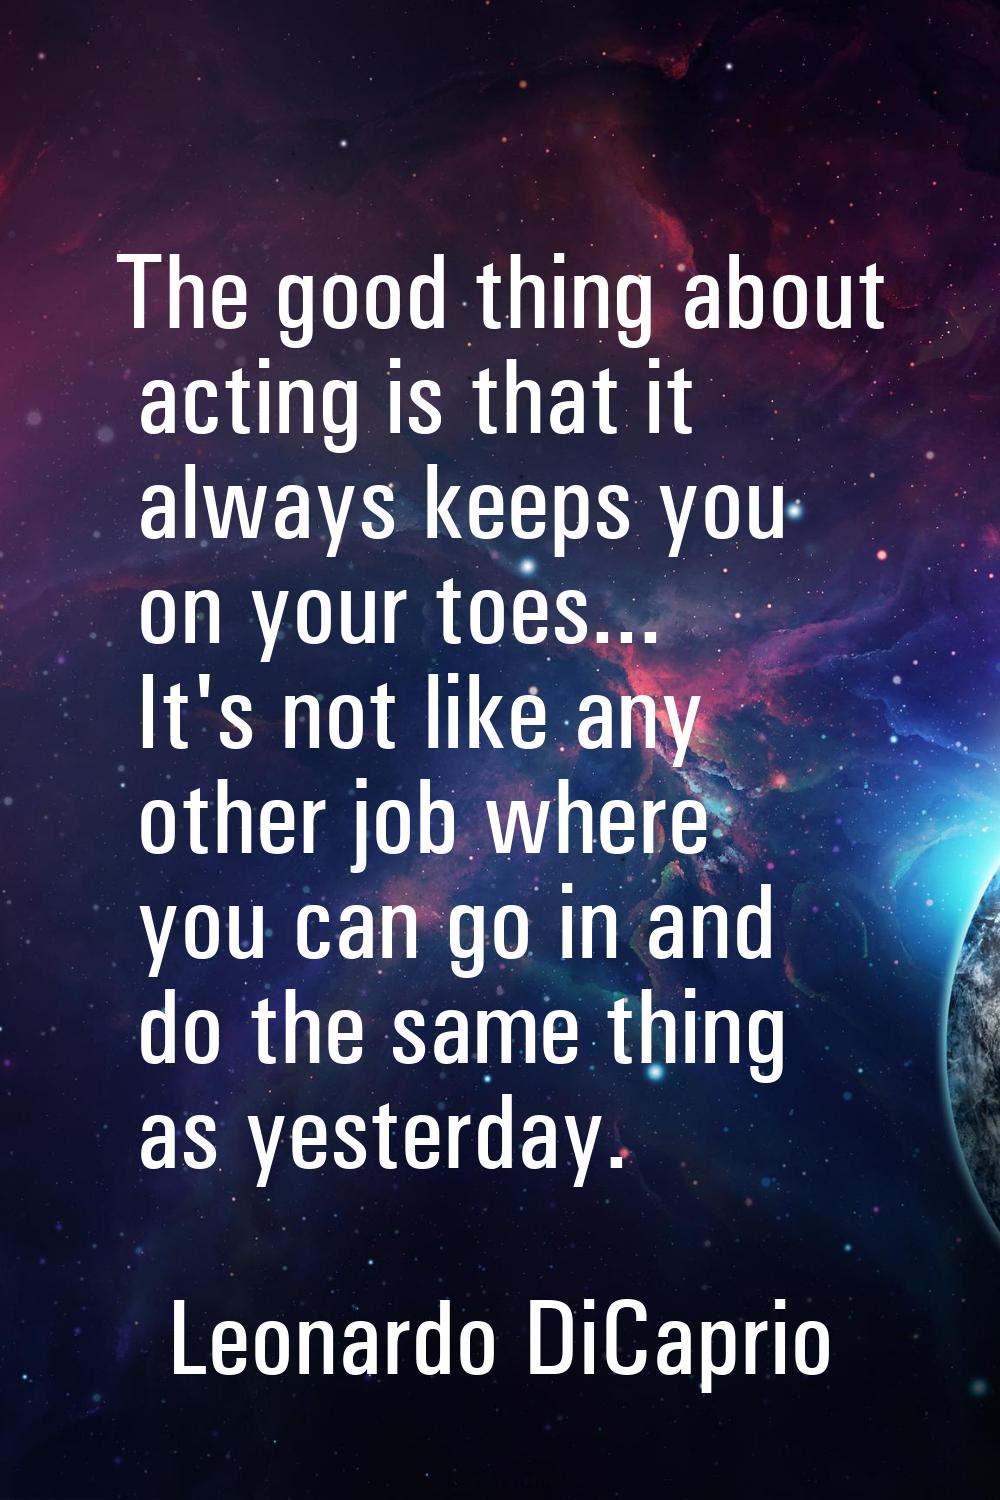 The good thing about acting is that it always keeps you on your toes... It's not like any other job